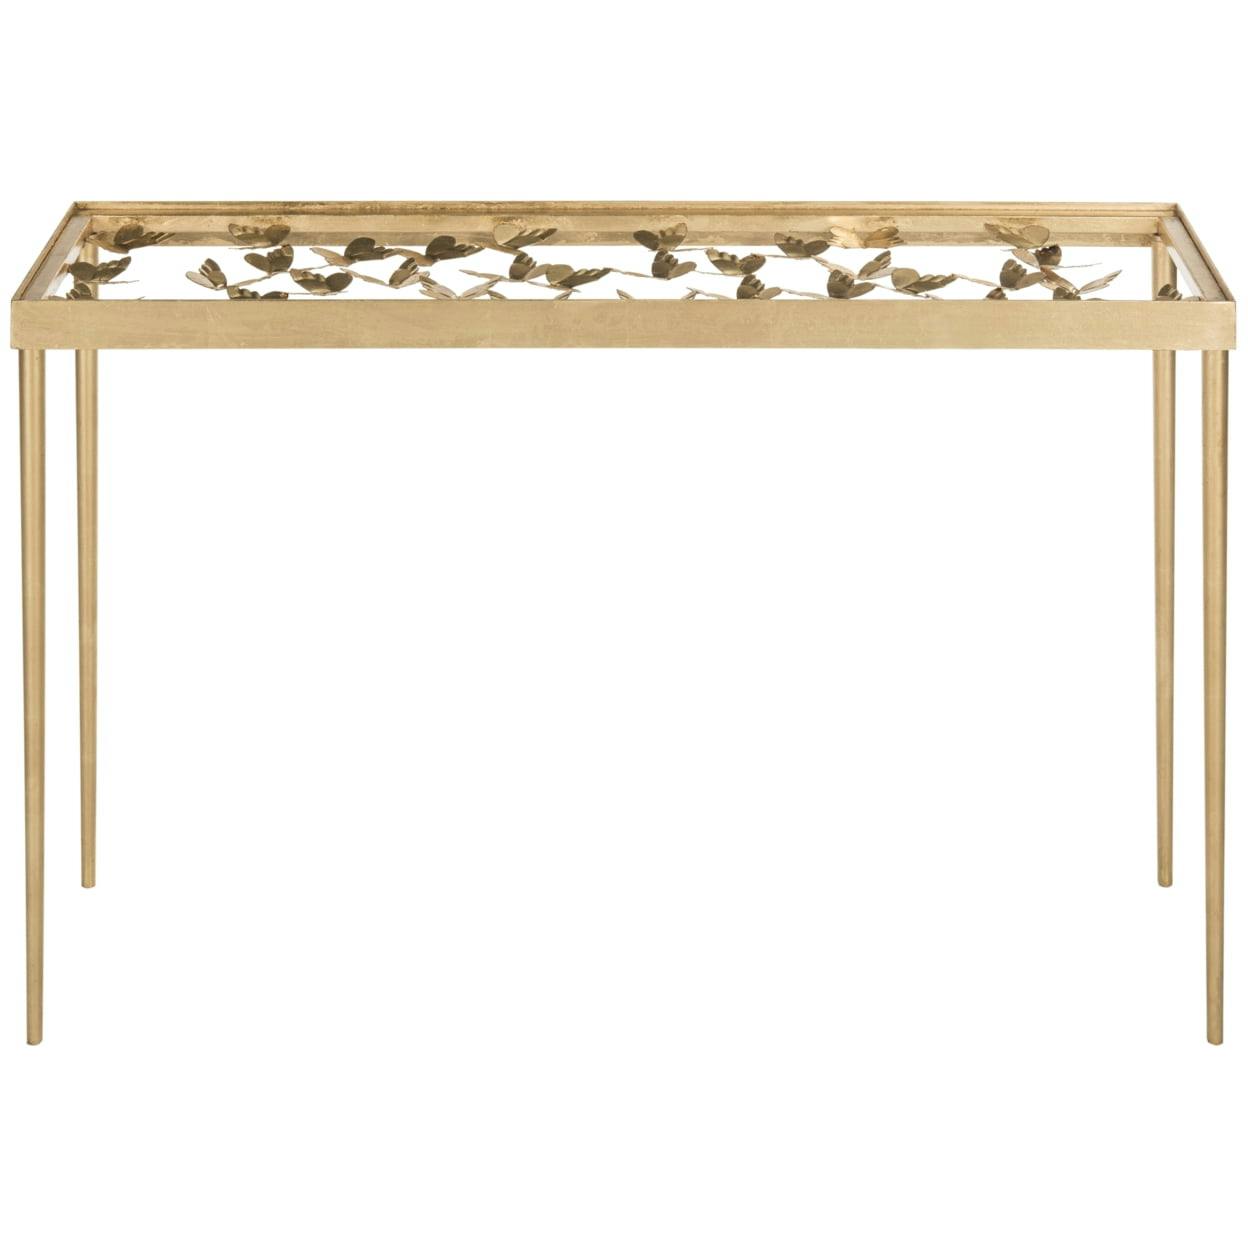 Ethereal Butterfly Antique Gold and Glass Console Table - 42"